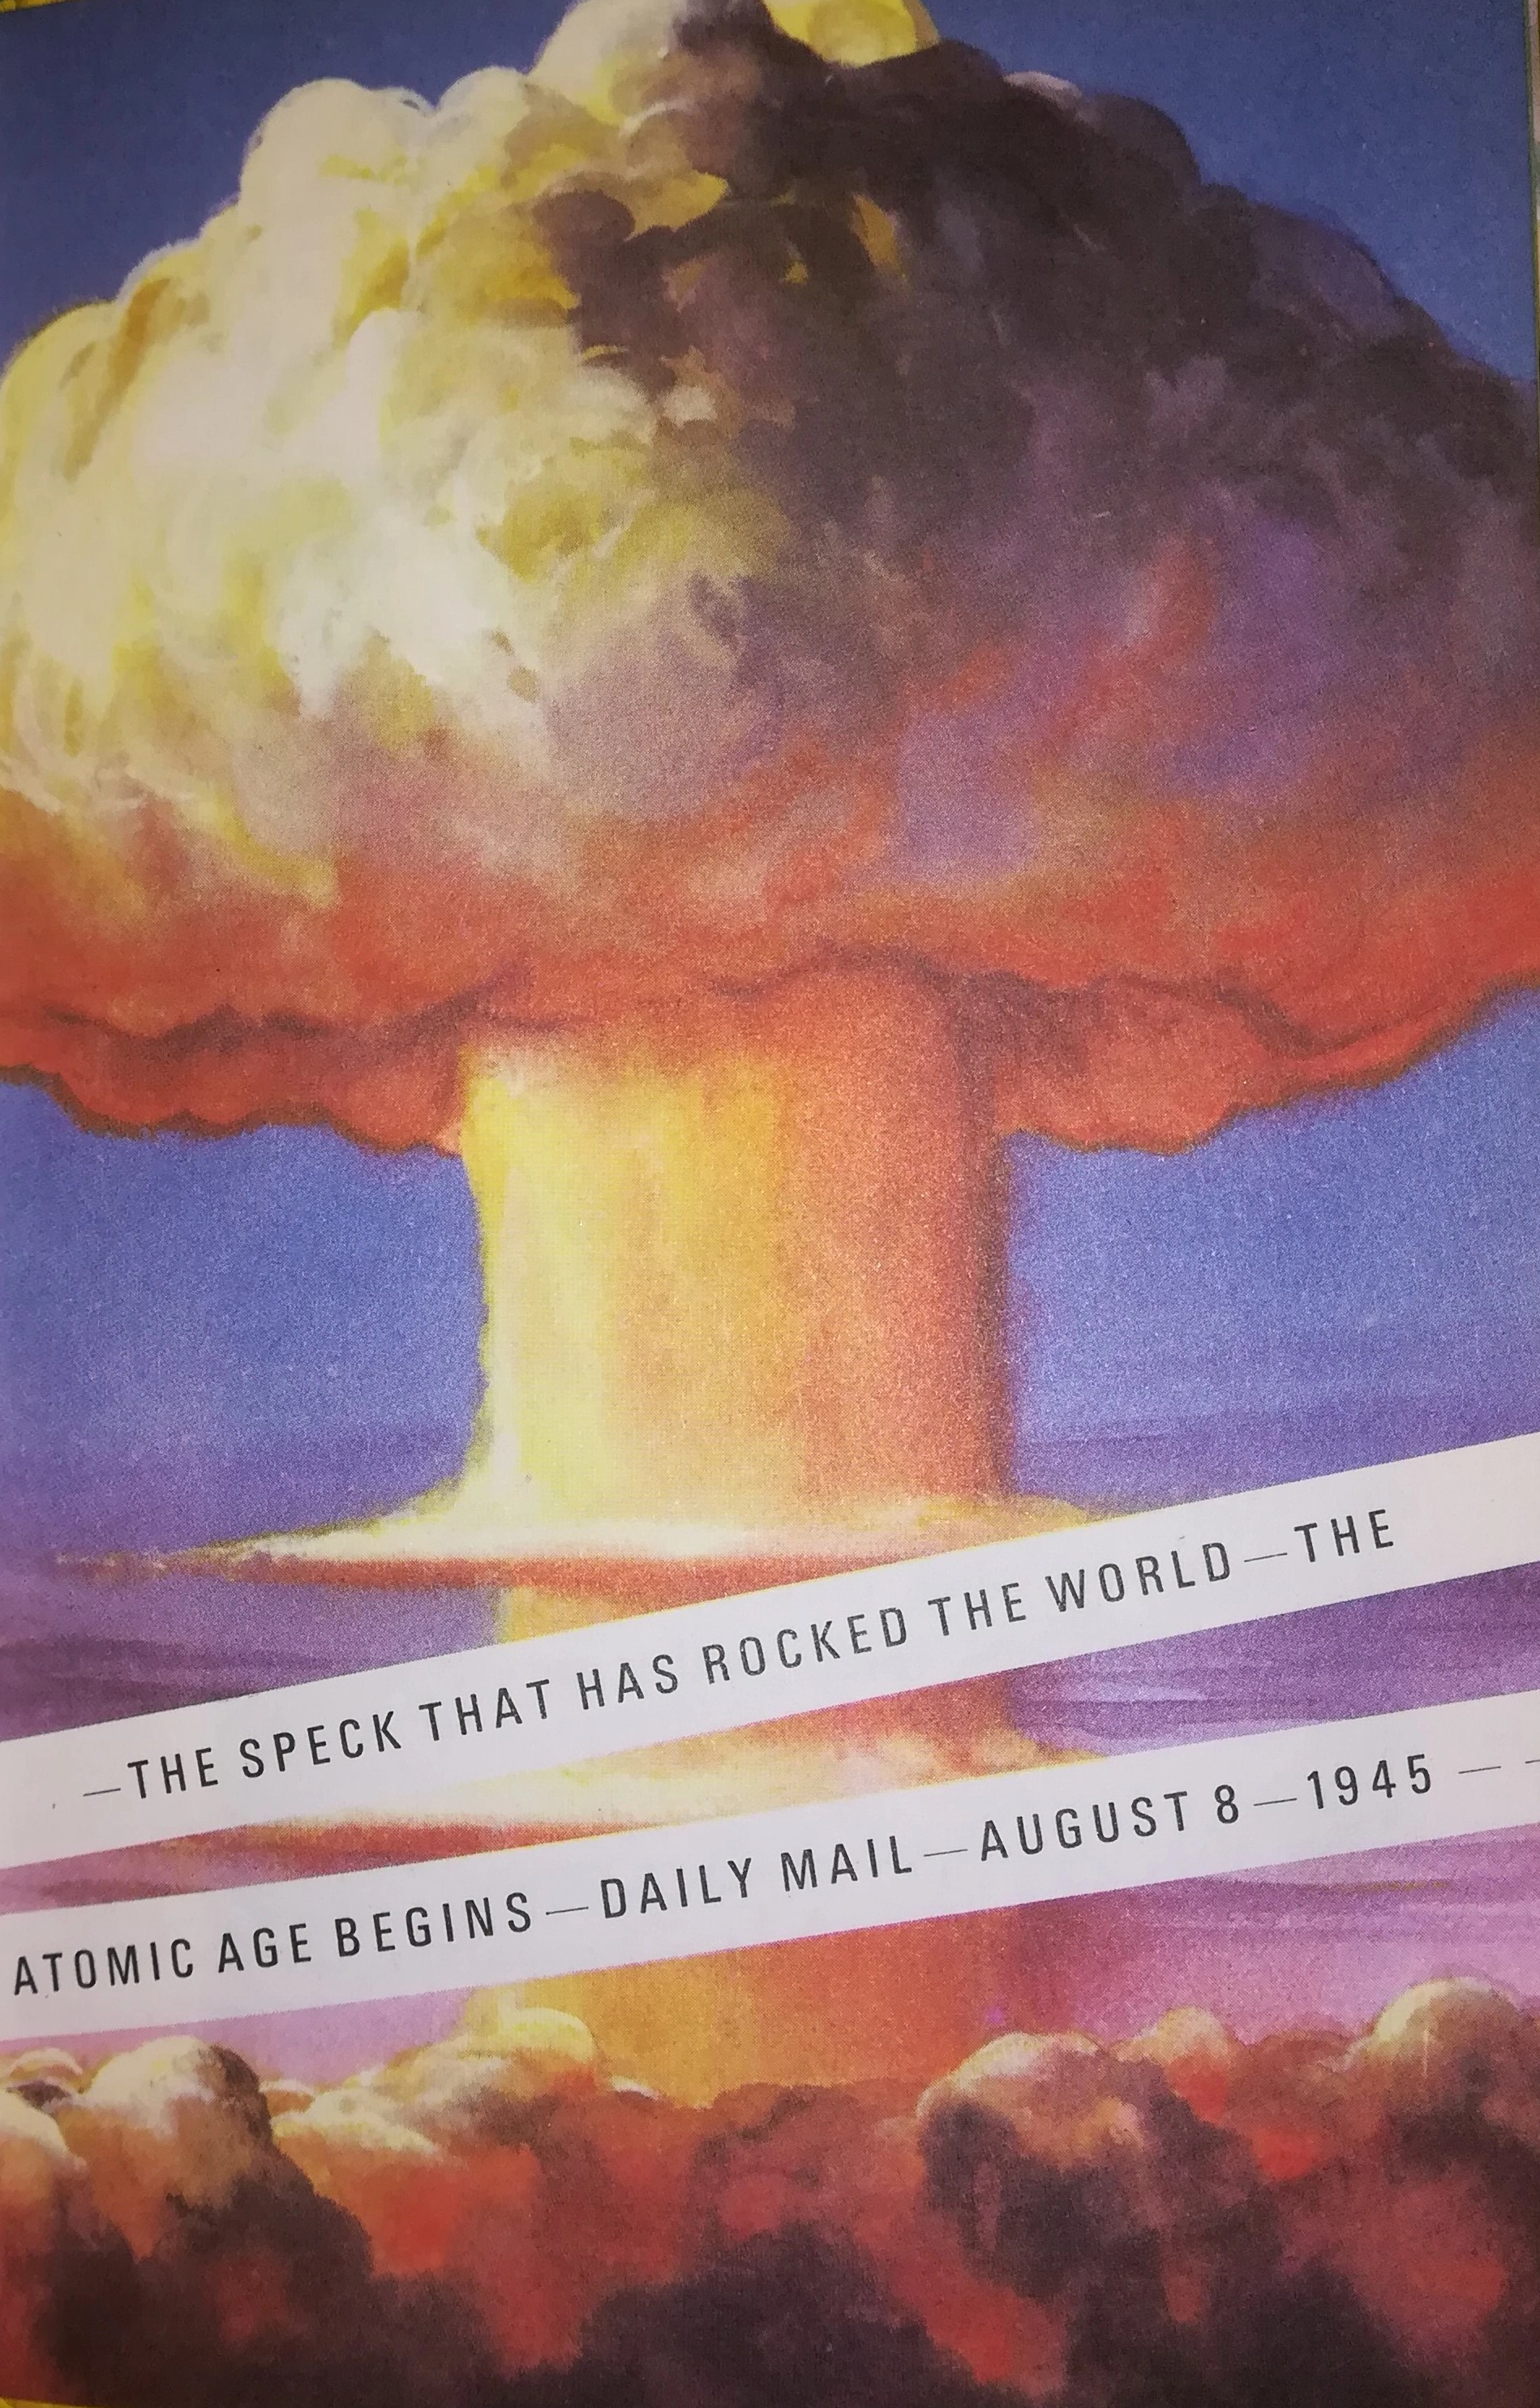 Page from 'The Story of Nuclear Power: a Ladybird Book' with an illustration of a mushroom cloud and banners with text reading 'The speck that rocked the world - the atomic age begins - Daily Mail - August 8, 1945'